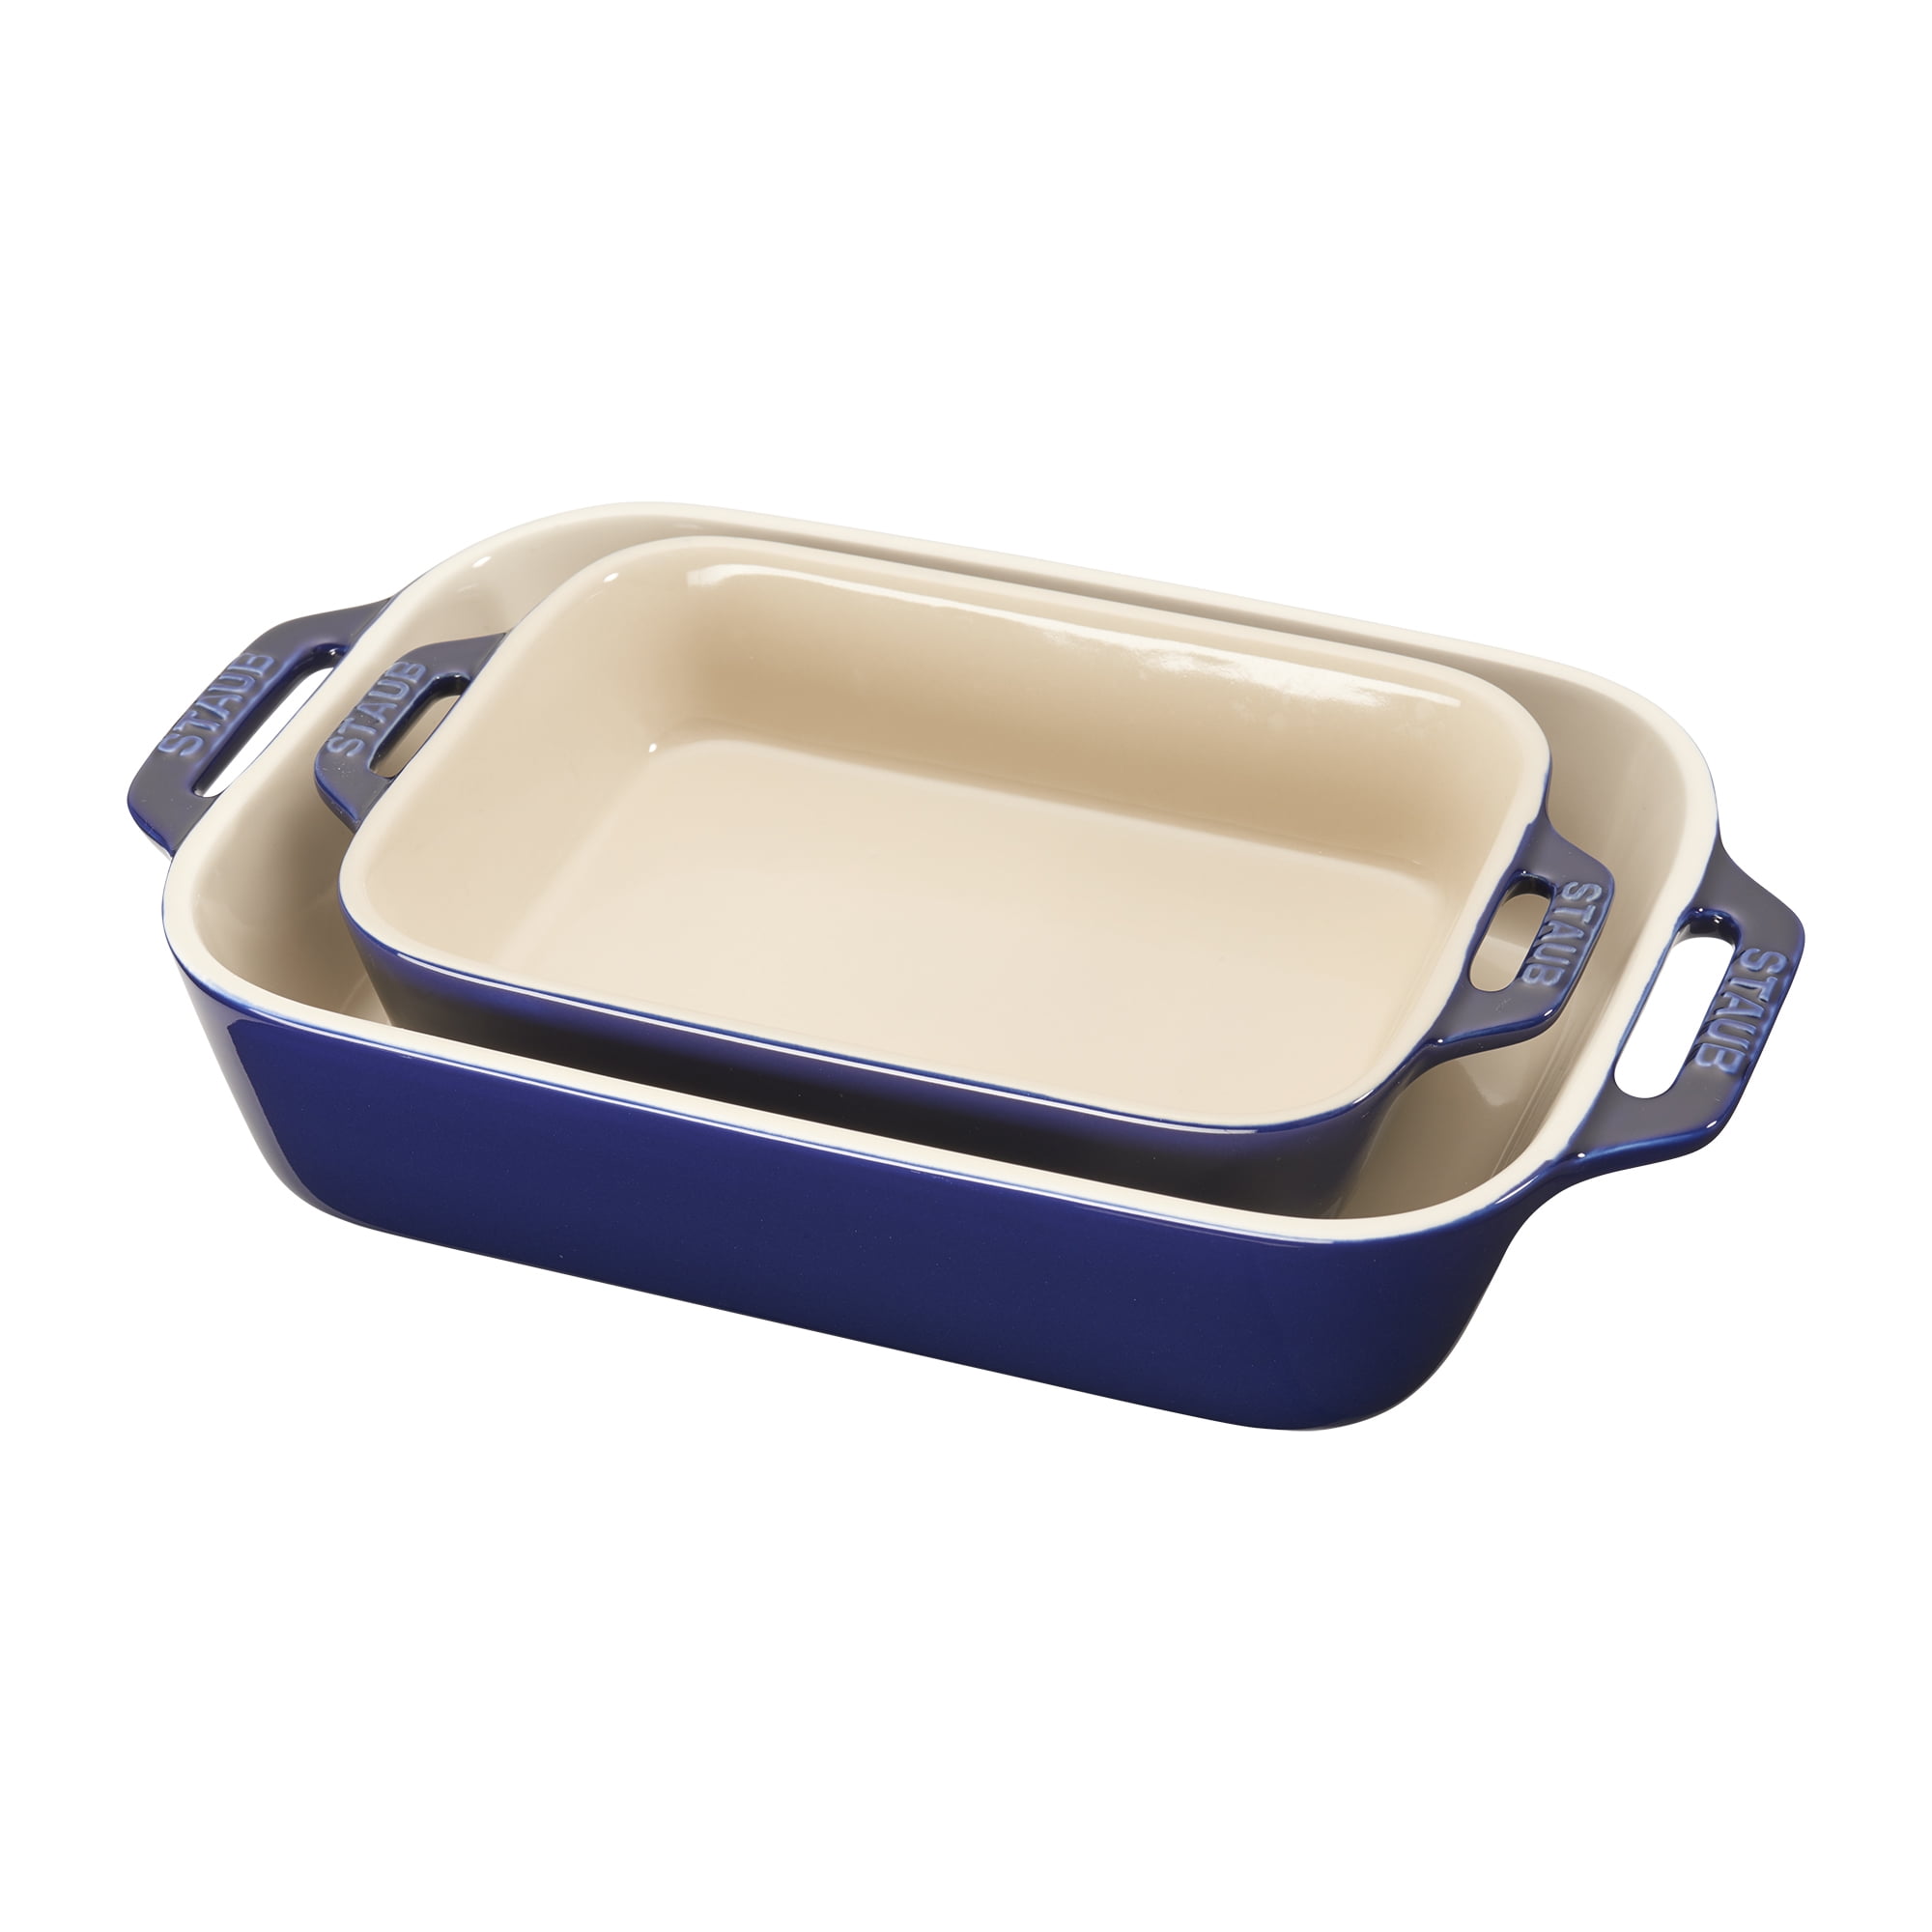 LEETOYI Ceramic Small Baking Dish Baking Pans for Cooking and Cake Dinner 7.5×5 Porcelain 2-Piece Rectangular Bakeware with Double Handle Royal Blue 